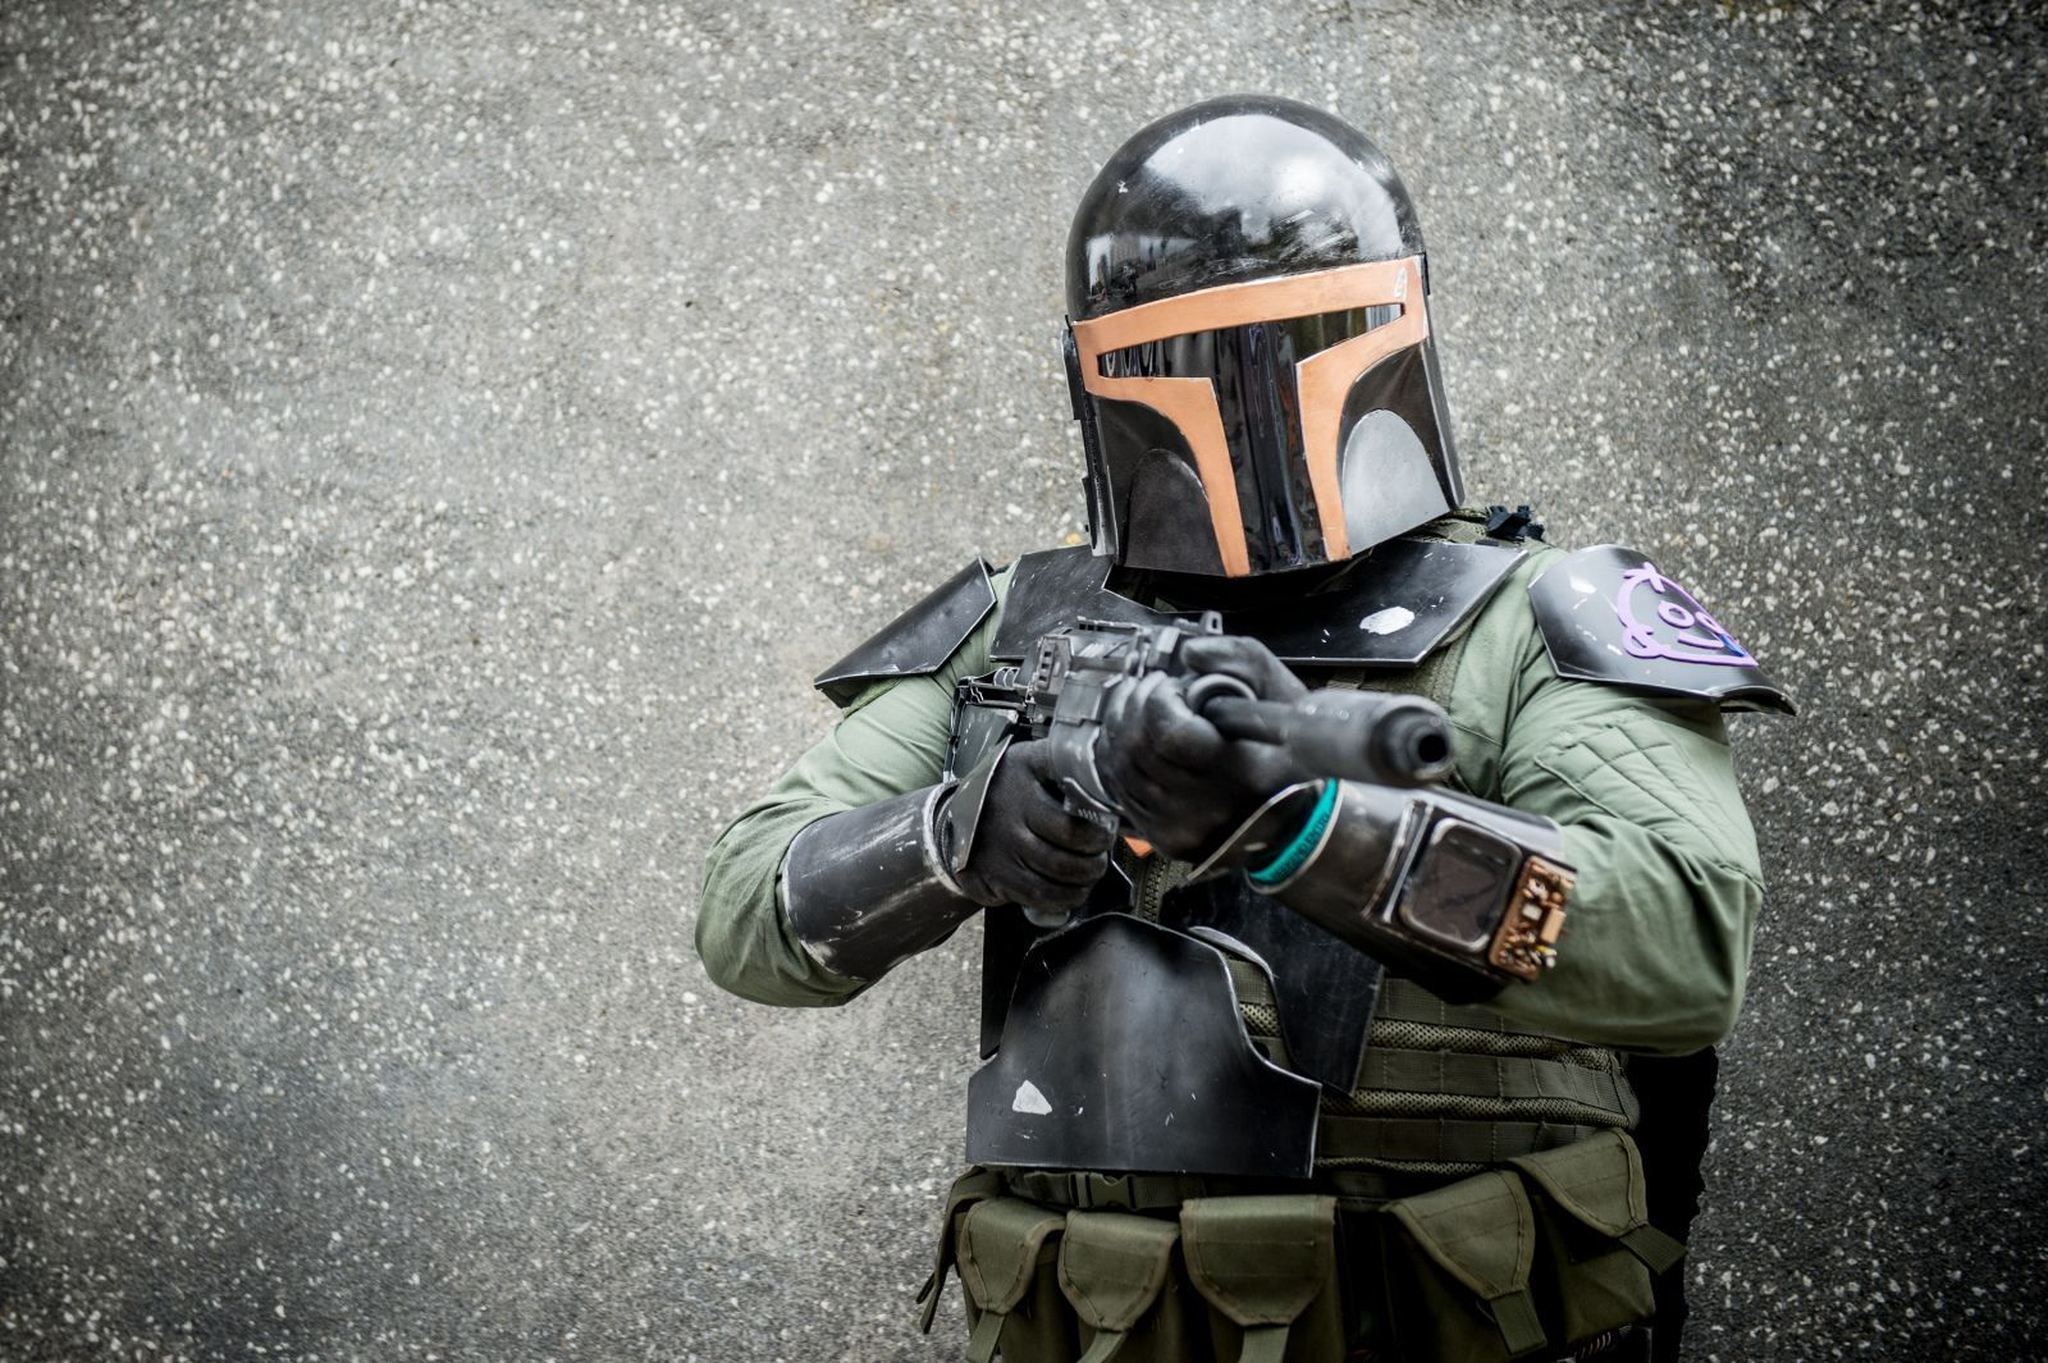 yes-the-mandalorian-is-really-the-name-of-the-star-wars-live-action-tv